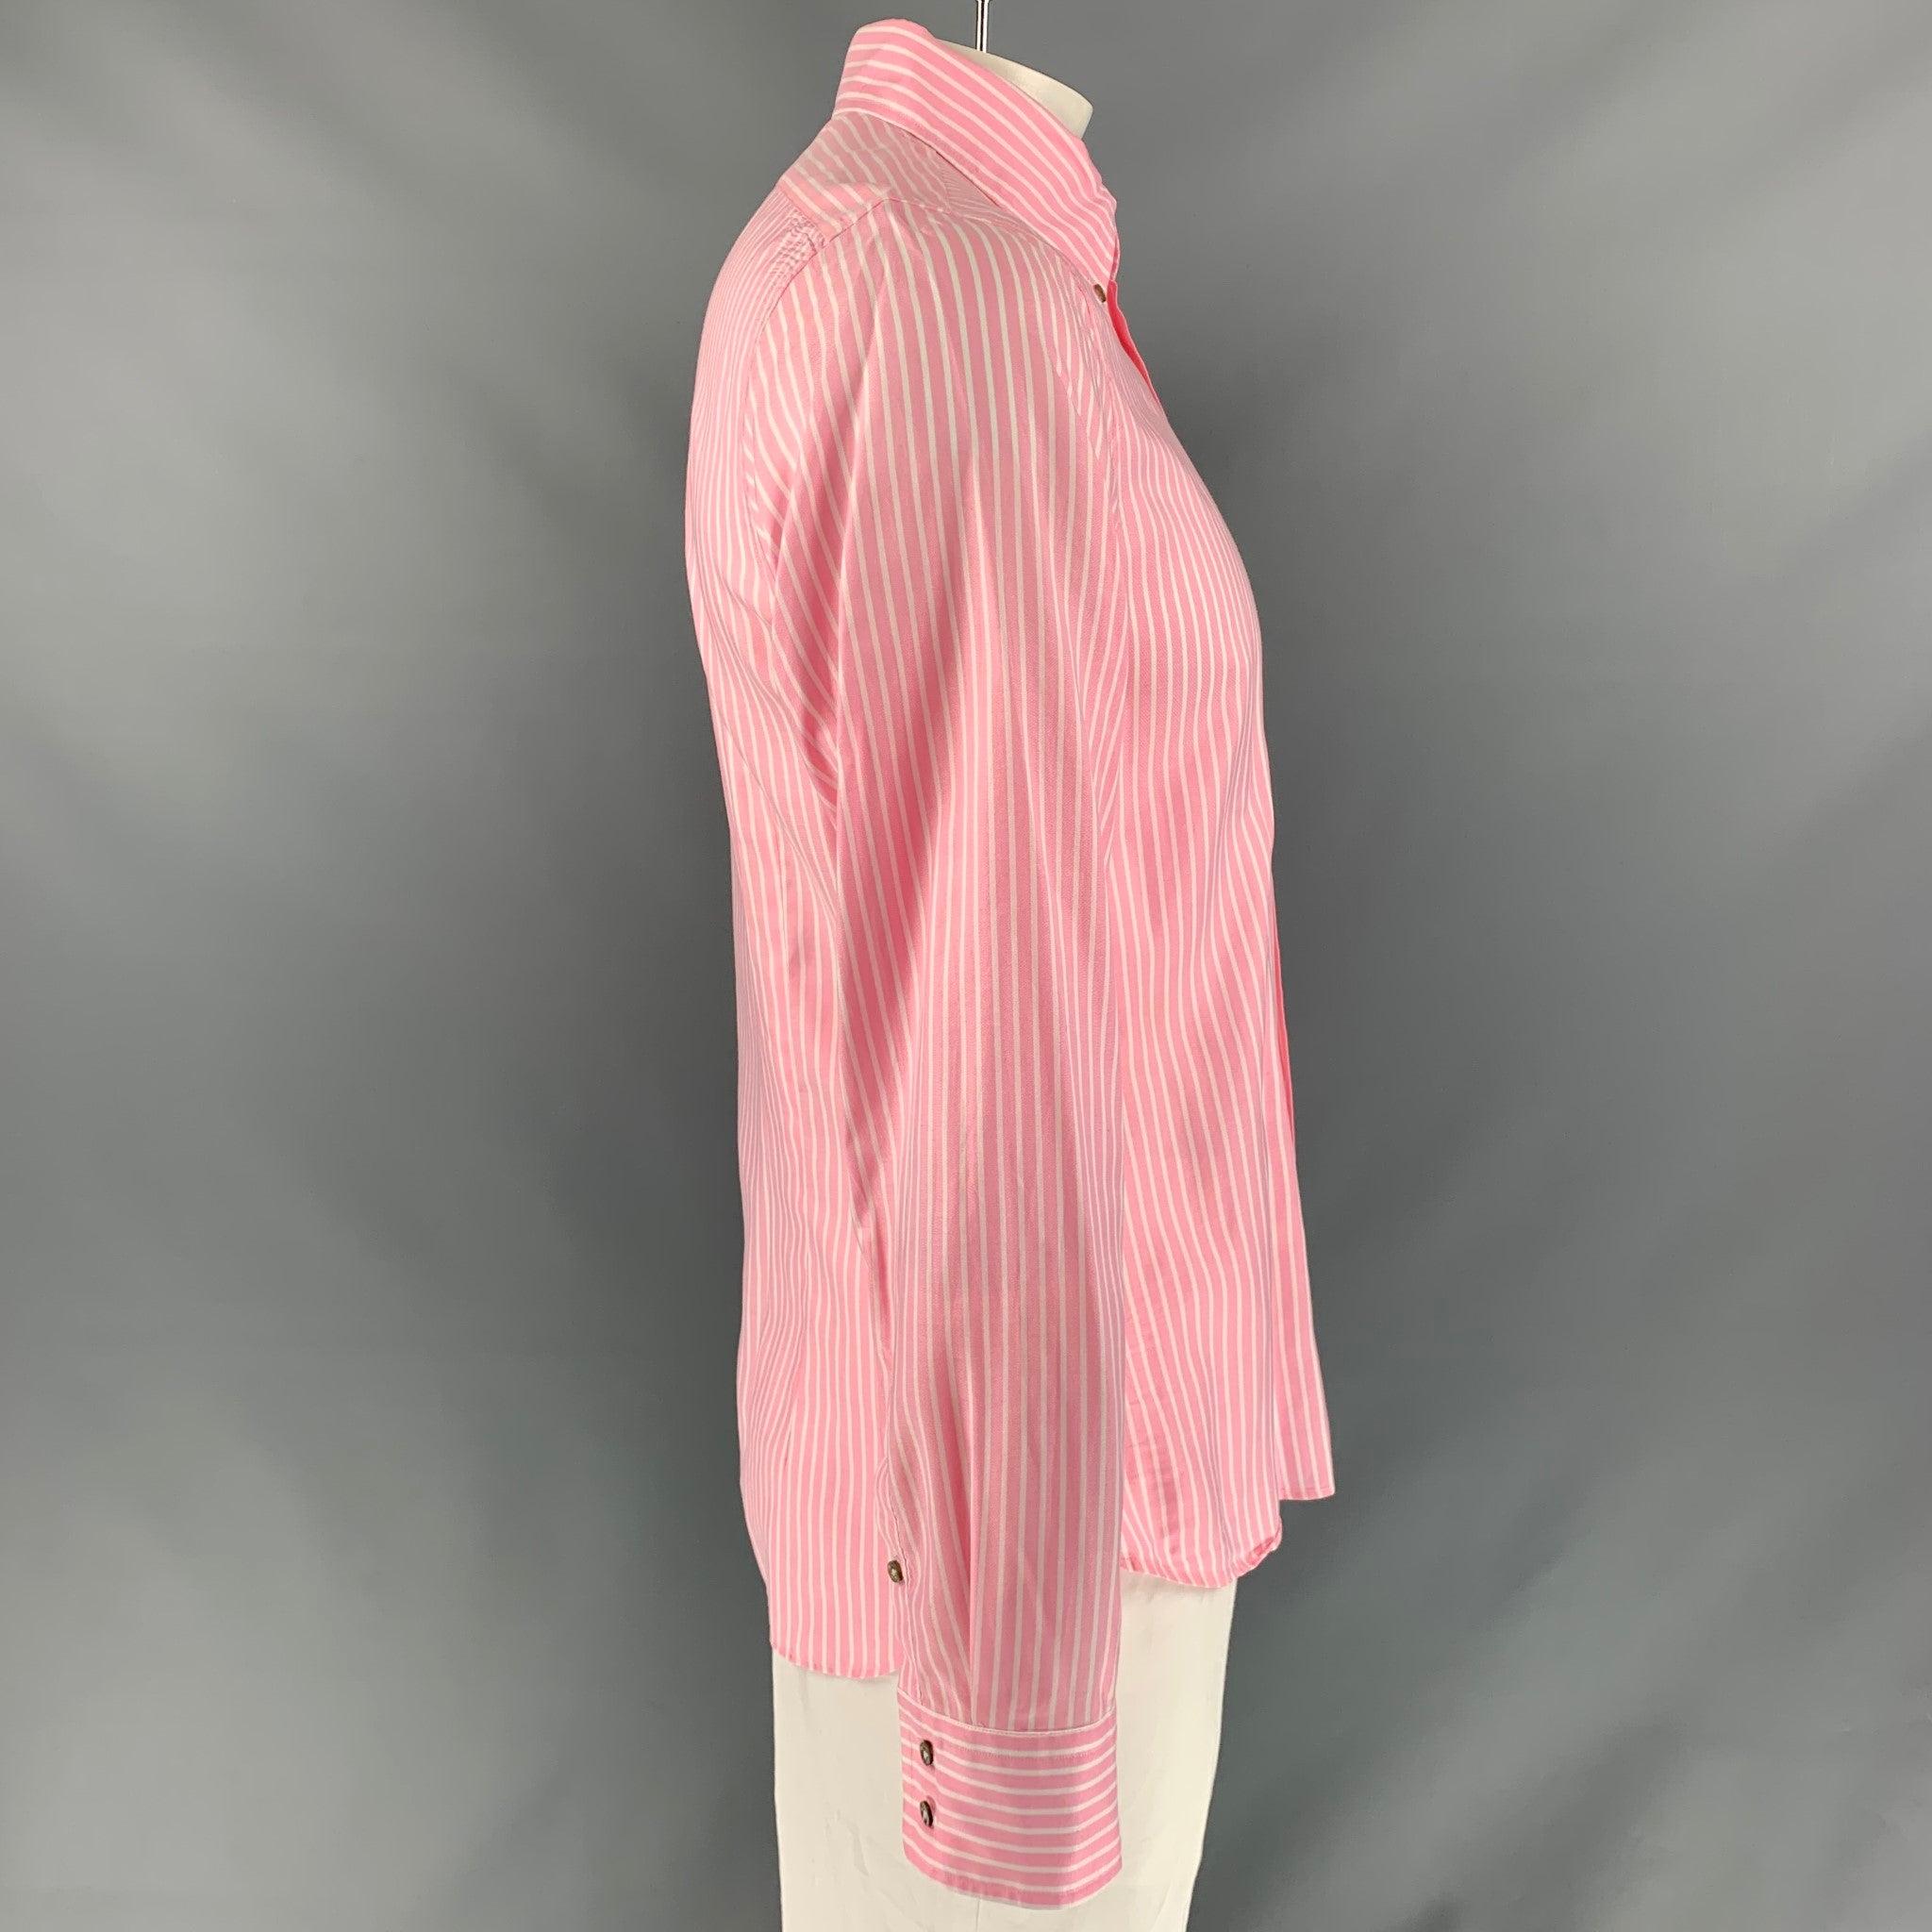 JIL SANDER long sleeve shirt comes in pink and white stripped cotton featuring a button down collar, buttoned closure and two button round cuff. Excellent Pre-Owned Condition.  

Marked:   43 

Measurements: 
 
Shoulder: 18 inches Chest: 43 inches